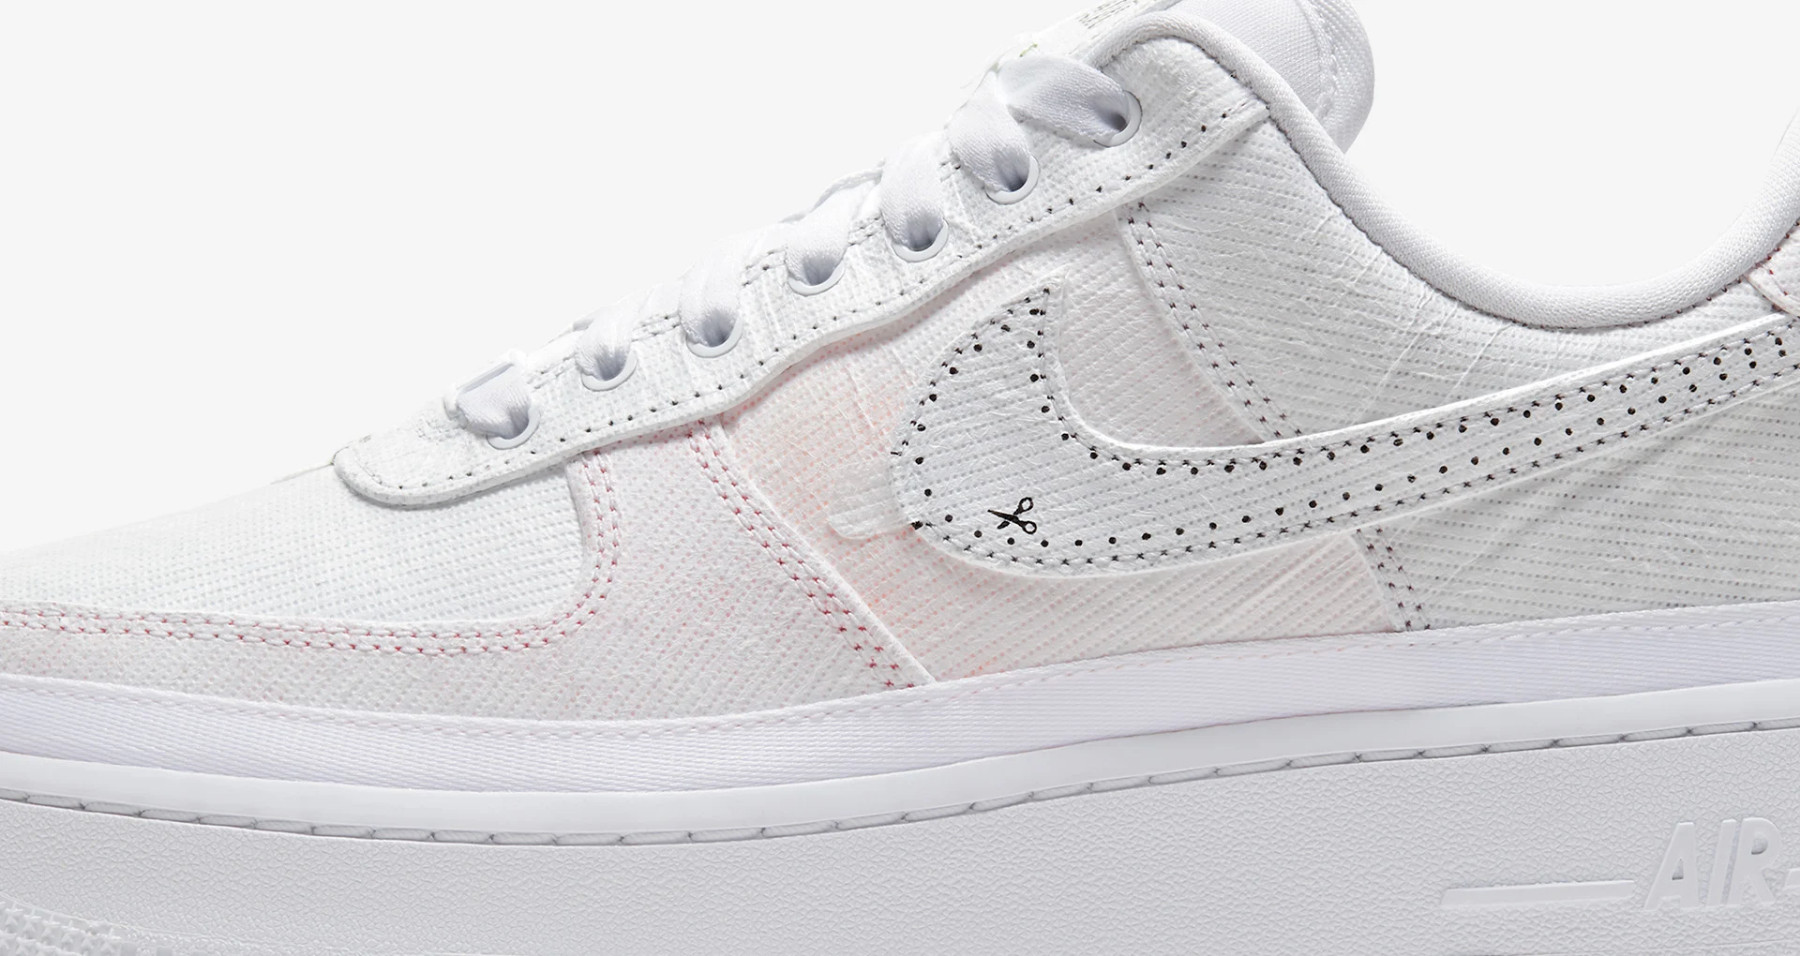 Le Nike Air Force 1 Low “Reveal 